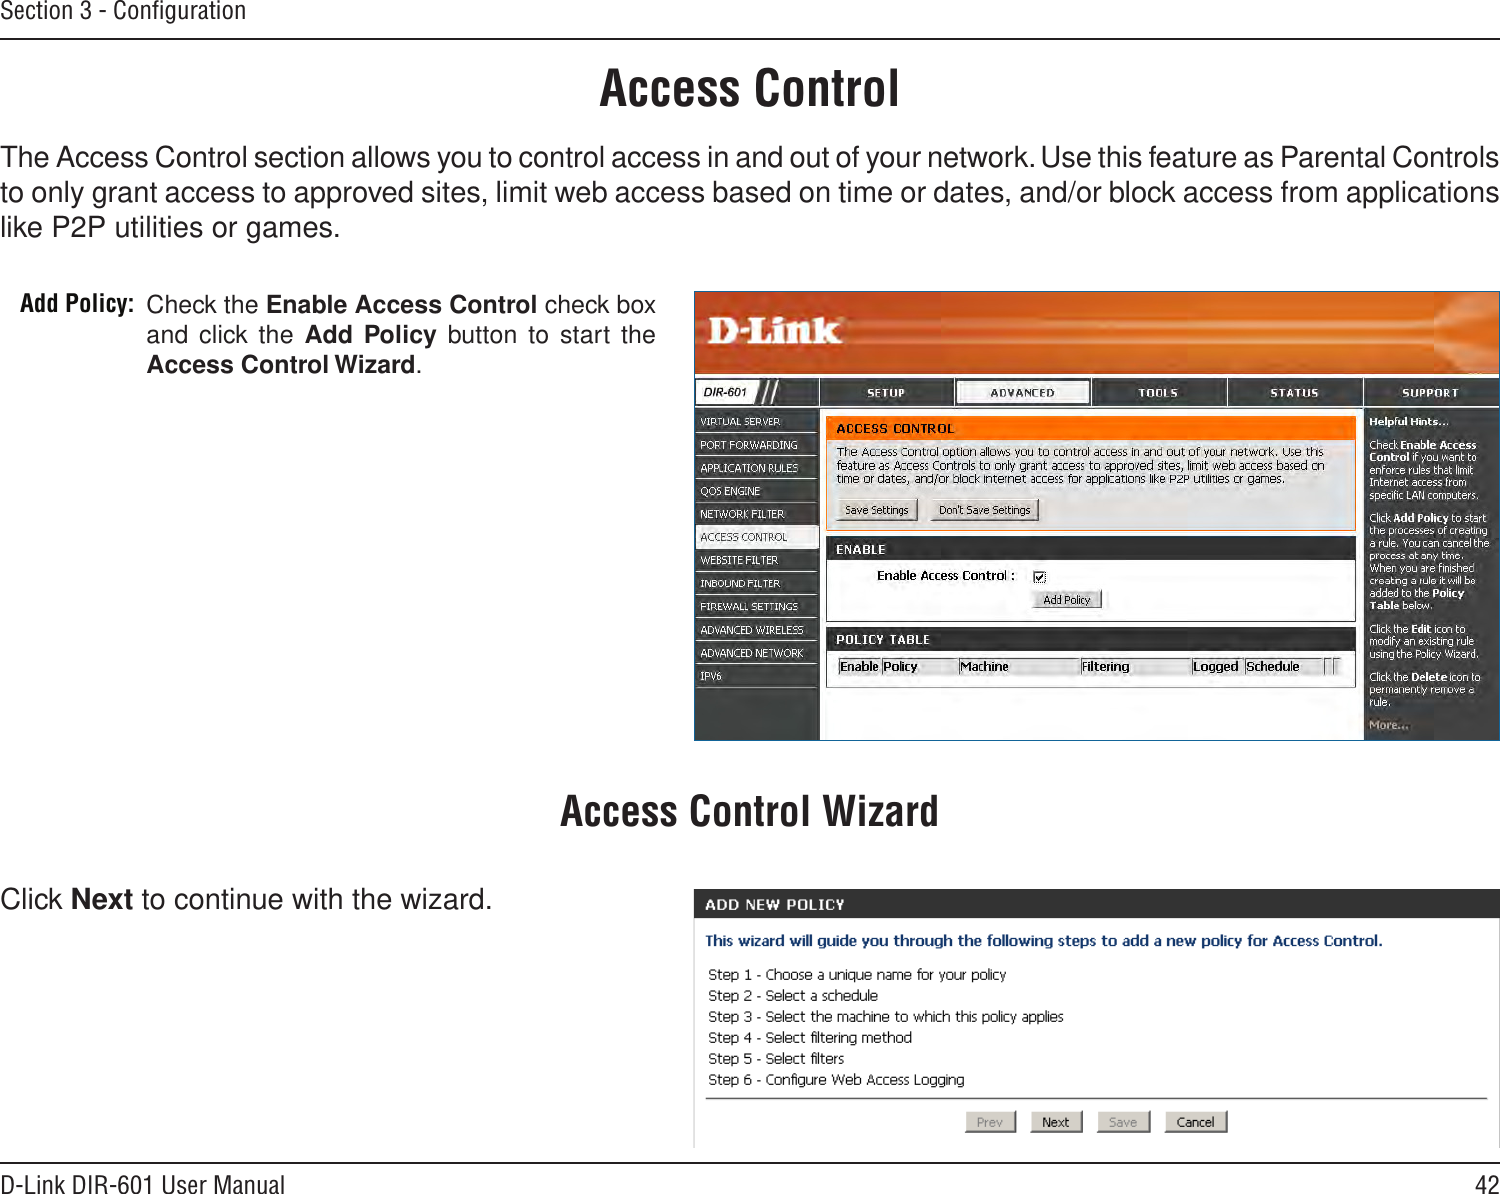 42D-Link DIR-601 User ManualSection 3 - ConﬁgurationAccess ControlCheck the Enable Access Control check box and click the  Add Policy button to start the Access Control Wizard. Add Policy:The Access Control section allows you to control access in and out of your network. Use this feature as Parental Controls to only grant access to approved sites, limit web access based on time or dates, and/or block access from applications like P2P utilities or games.Click Next to continue with the wizard.Access Control Wizard